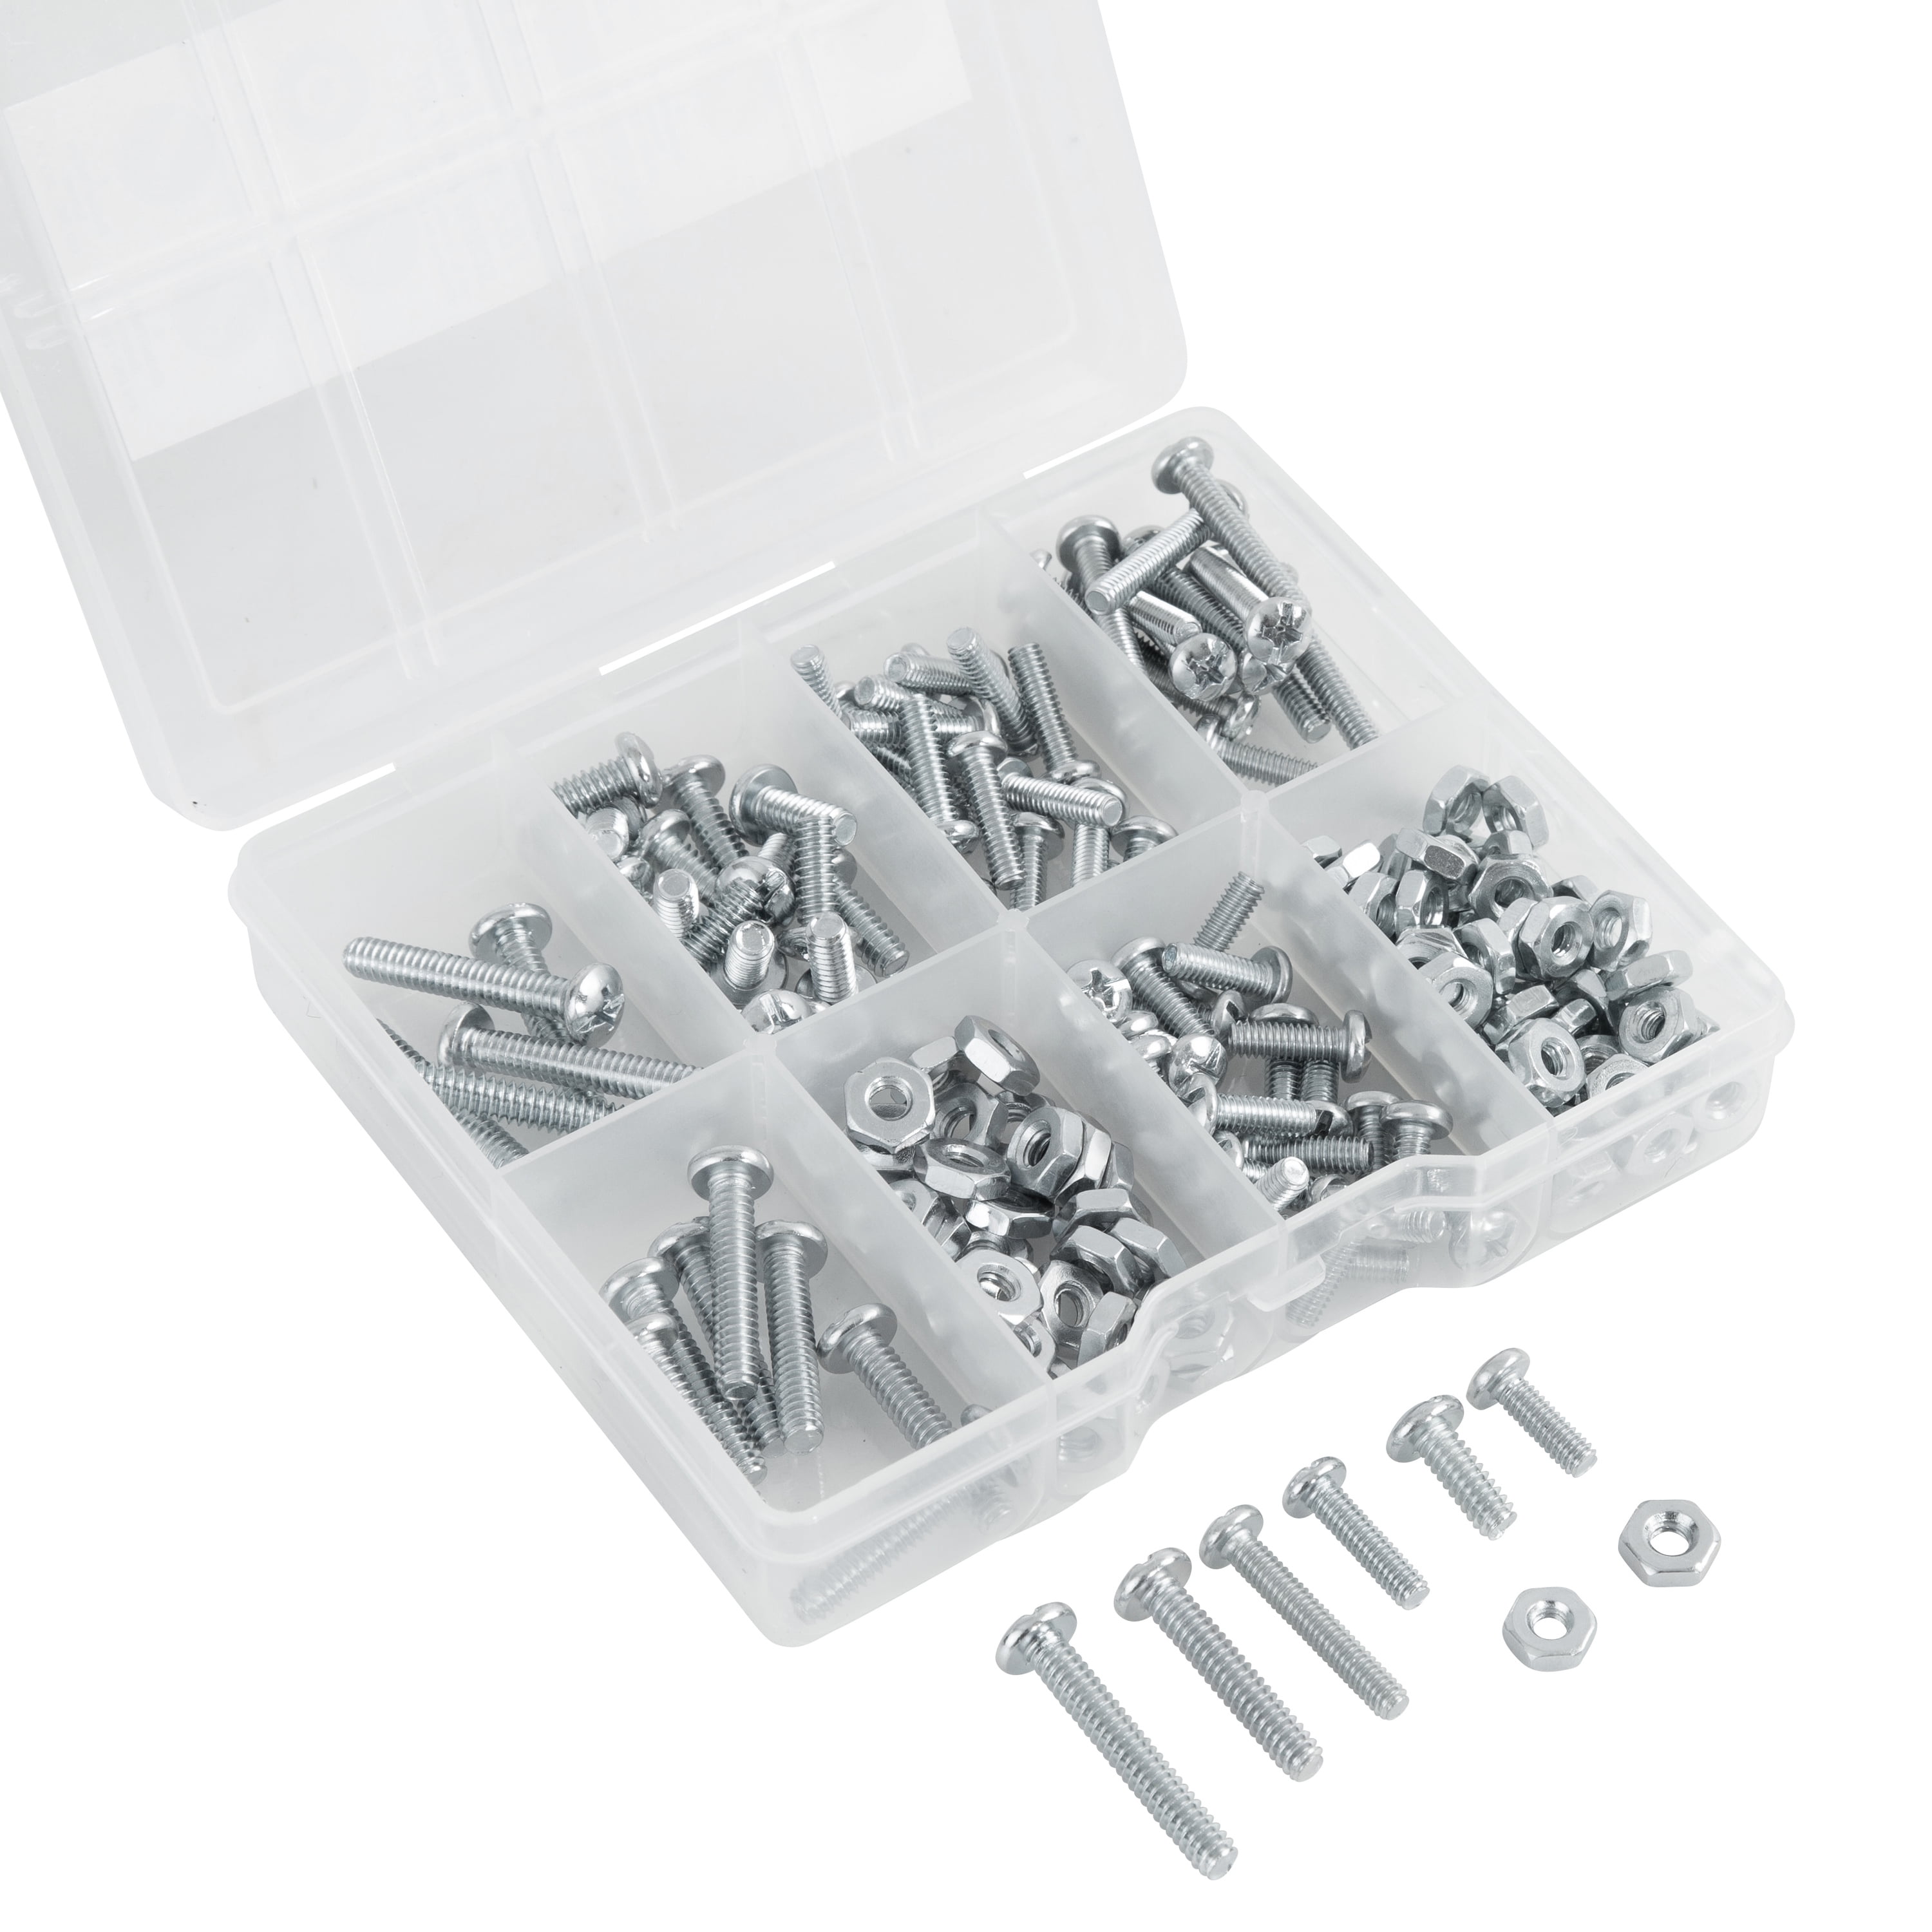 12 Kinds Small Nuts Kit with Plastic Box Stainless Steel Electronics for Glasses Watches Bolts Kit